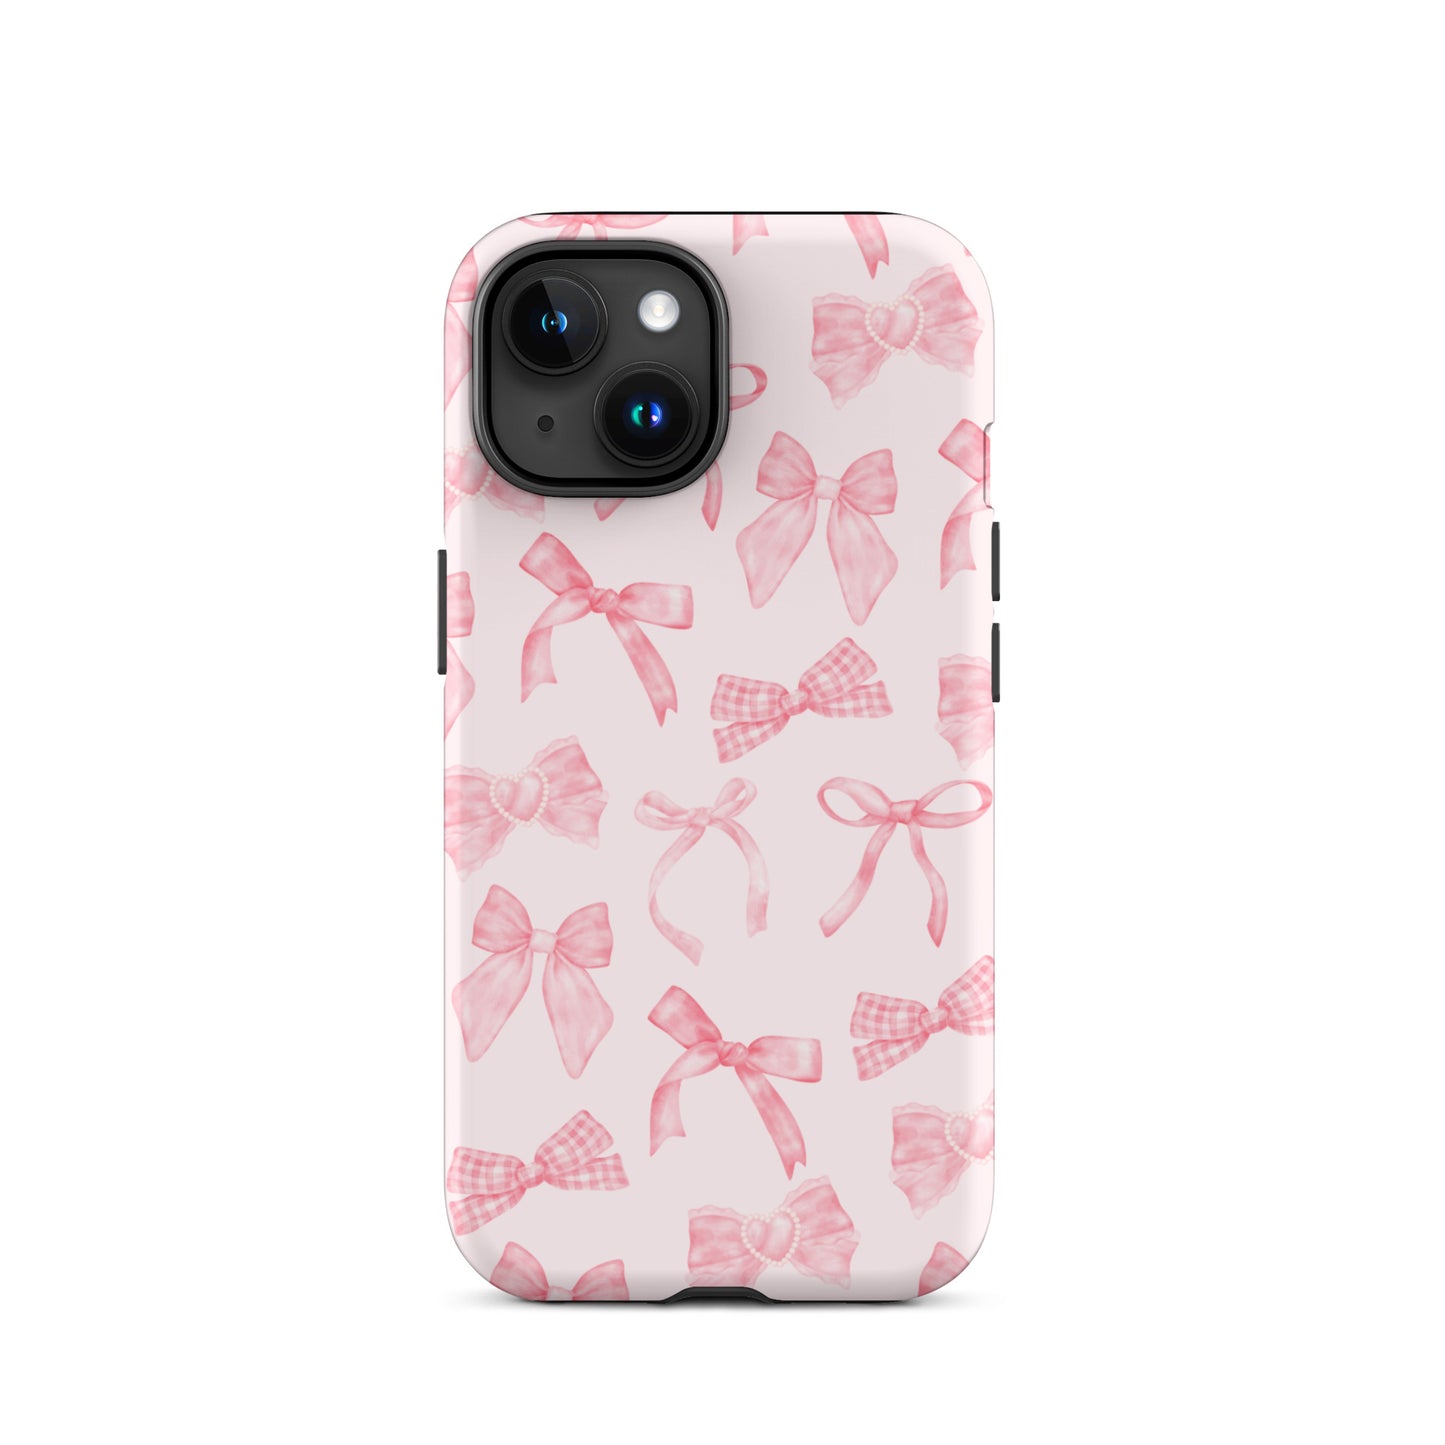 Bow Delight iPhone Case